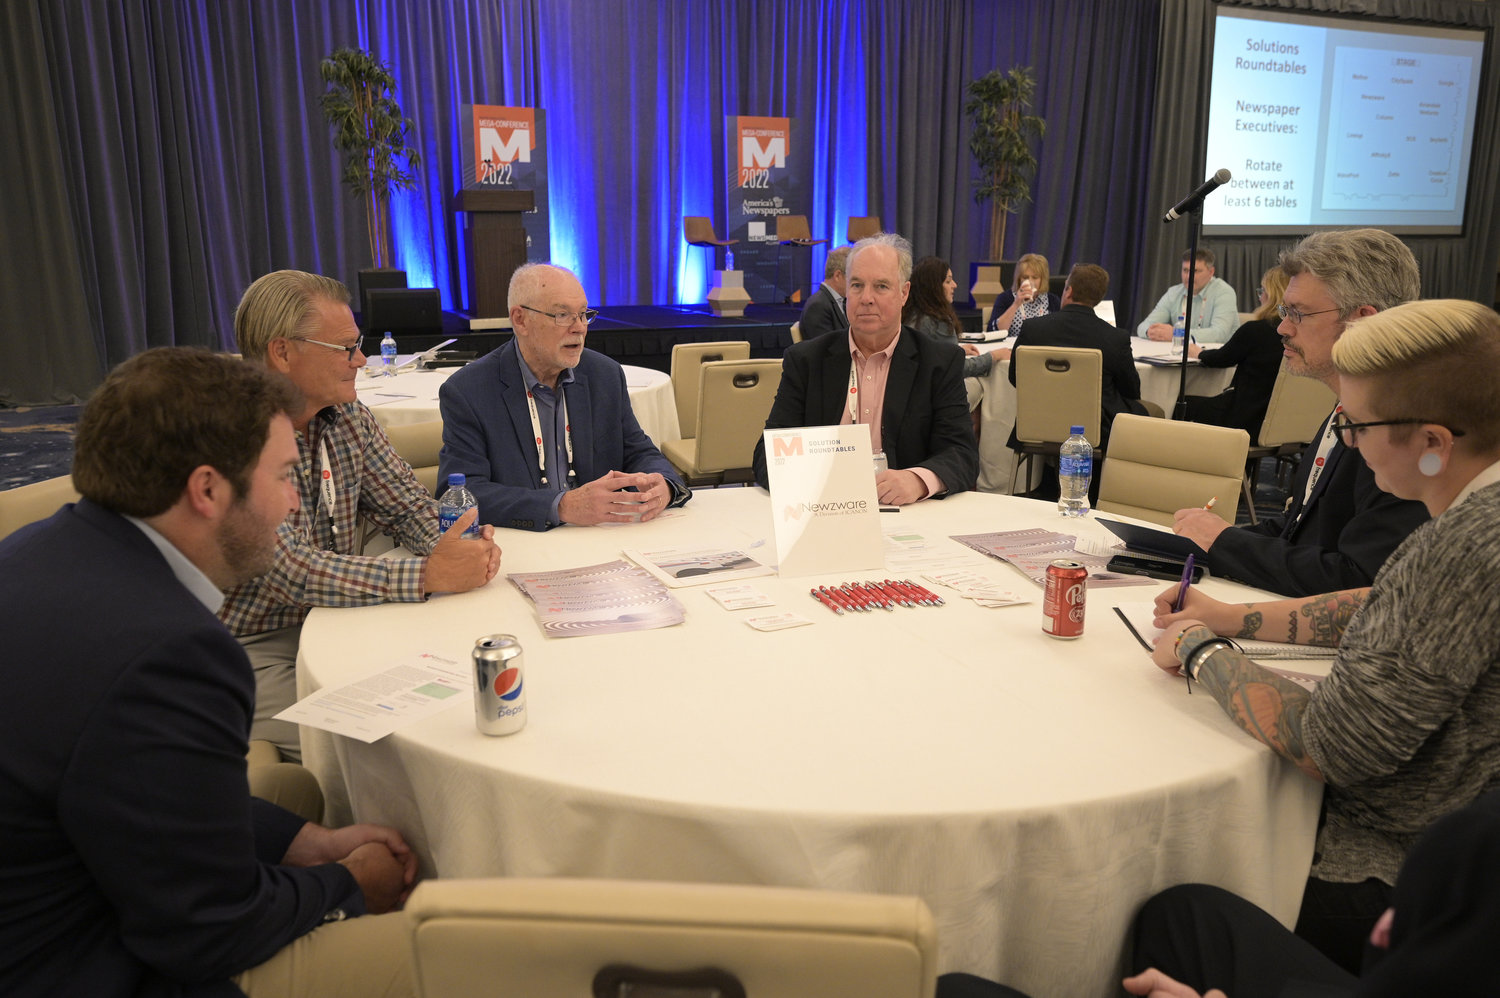 One of the topics at the Newzware Roundtable: Engaging potential subscribers who are starting a new subscription on your website using embedded forms that track story conversions to subscribers. (Photo by Phelan M. Ebenhack)